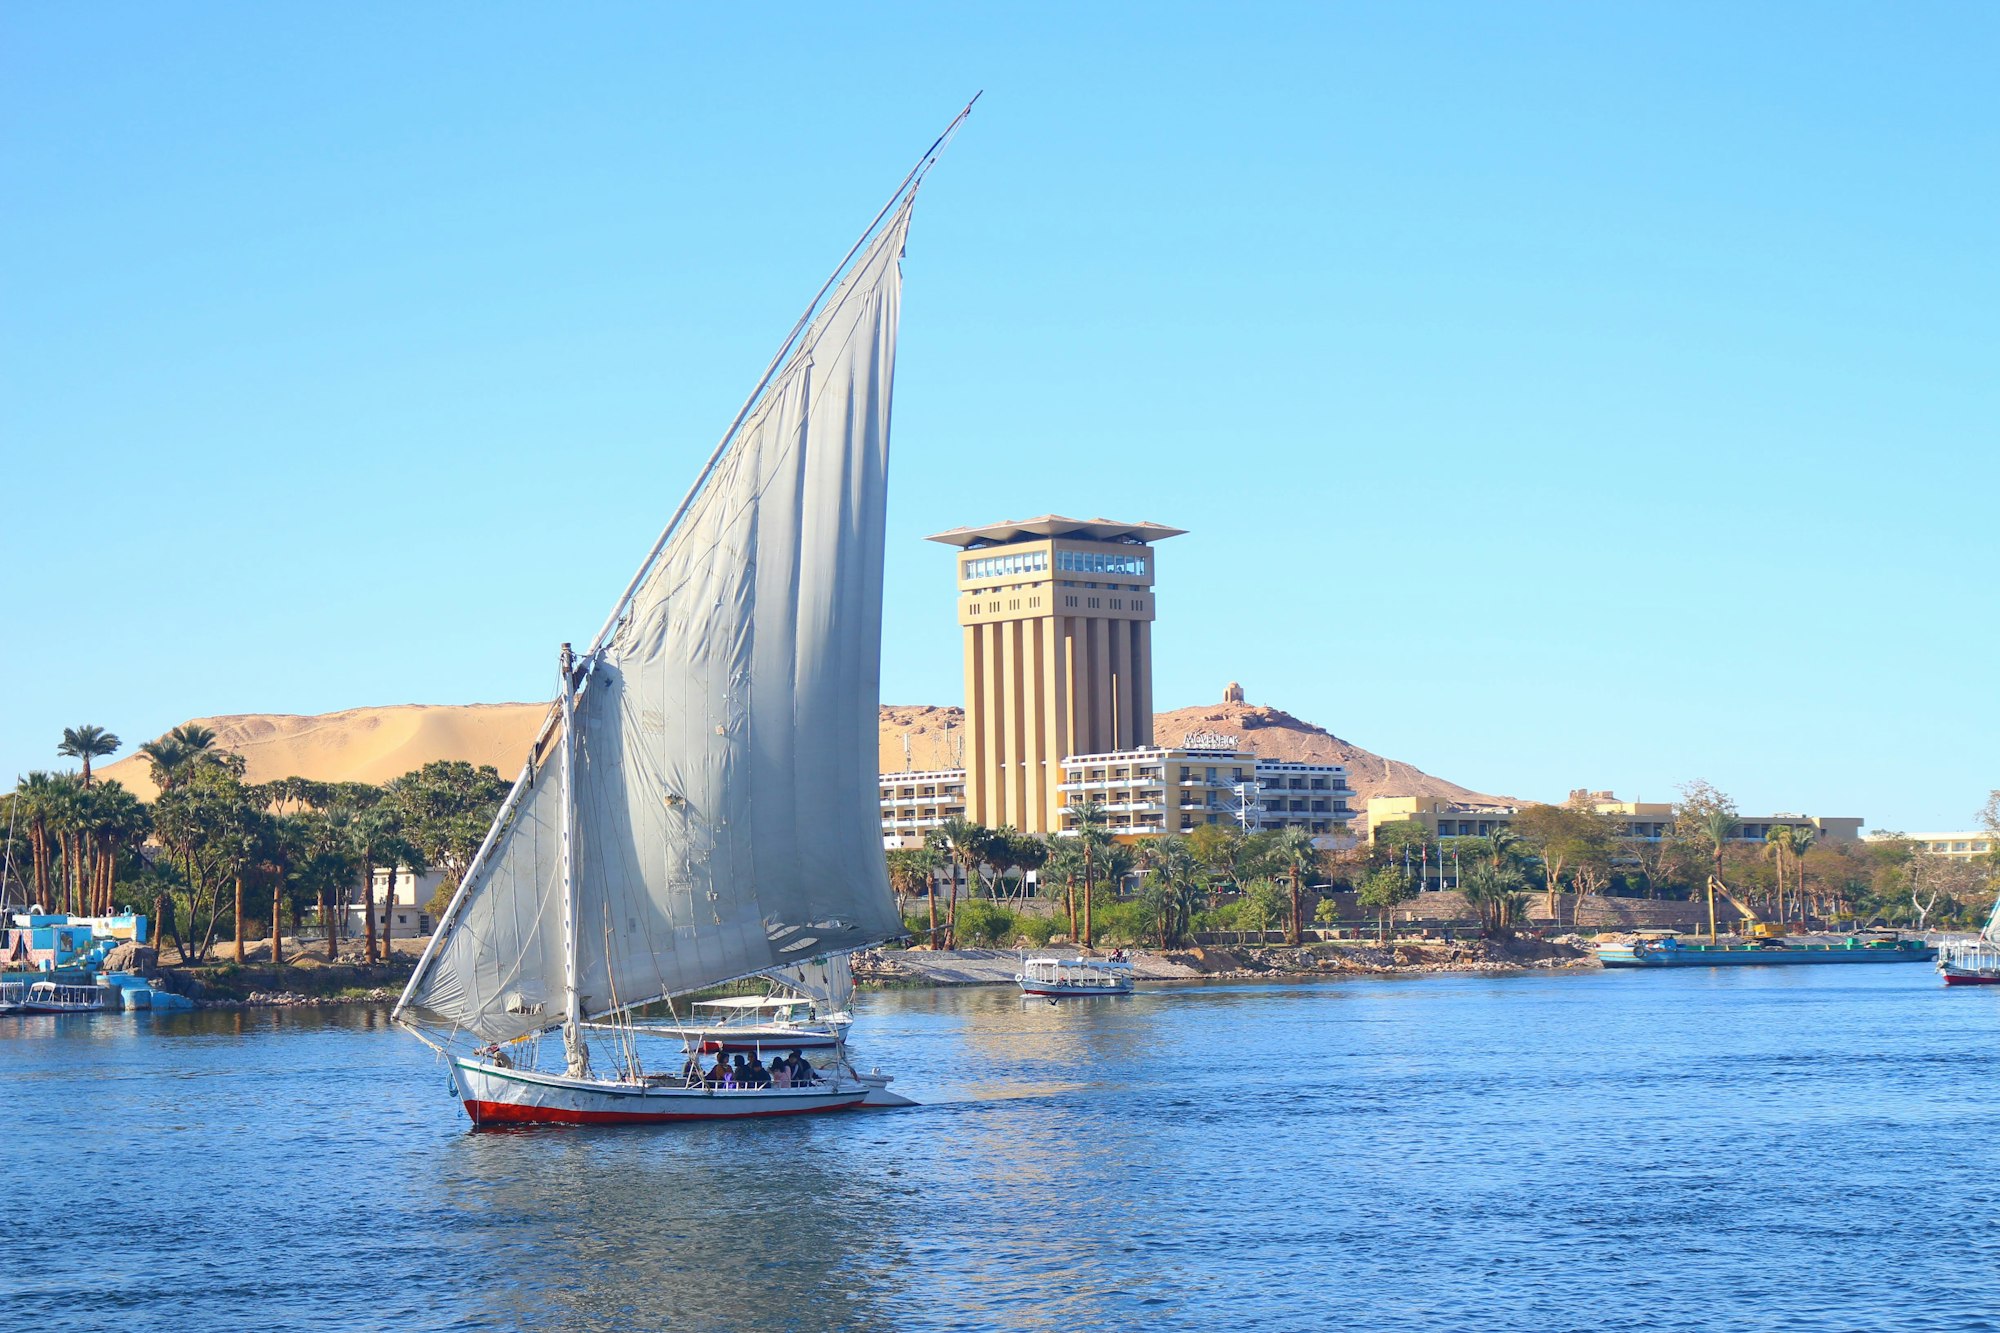 white sail boat on water near city buildings during daytime